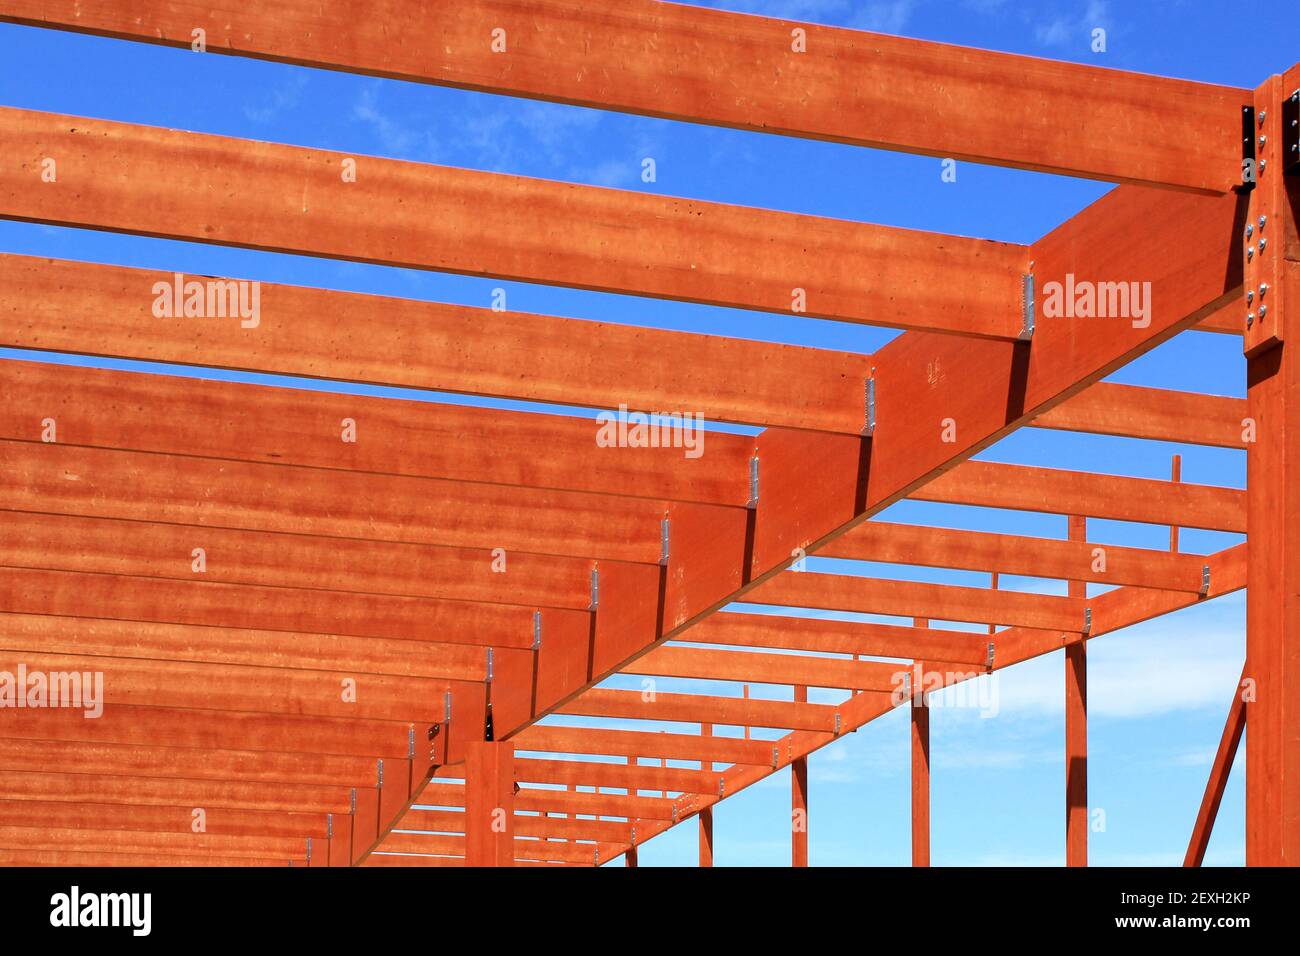 A wooden frame Stock Photo